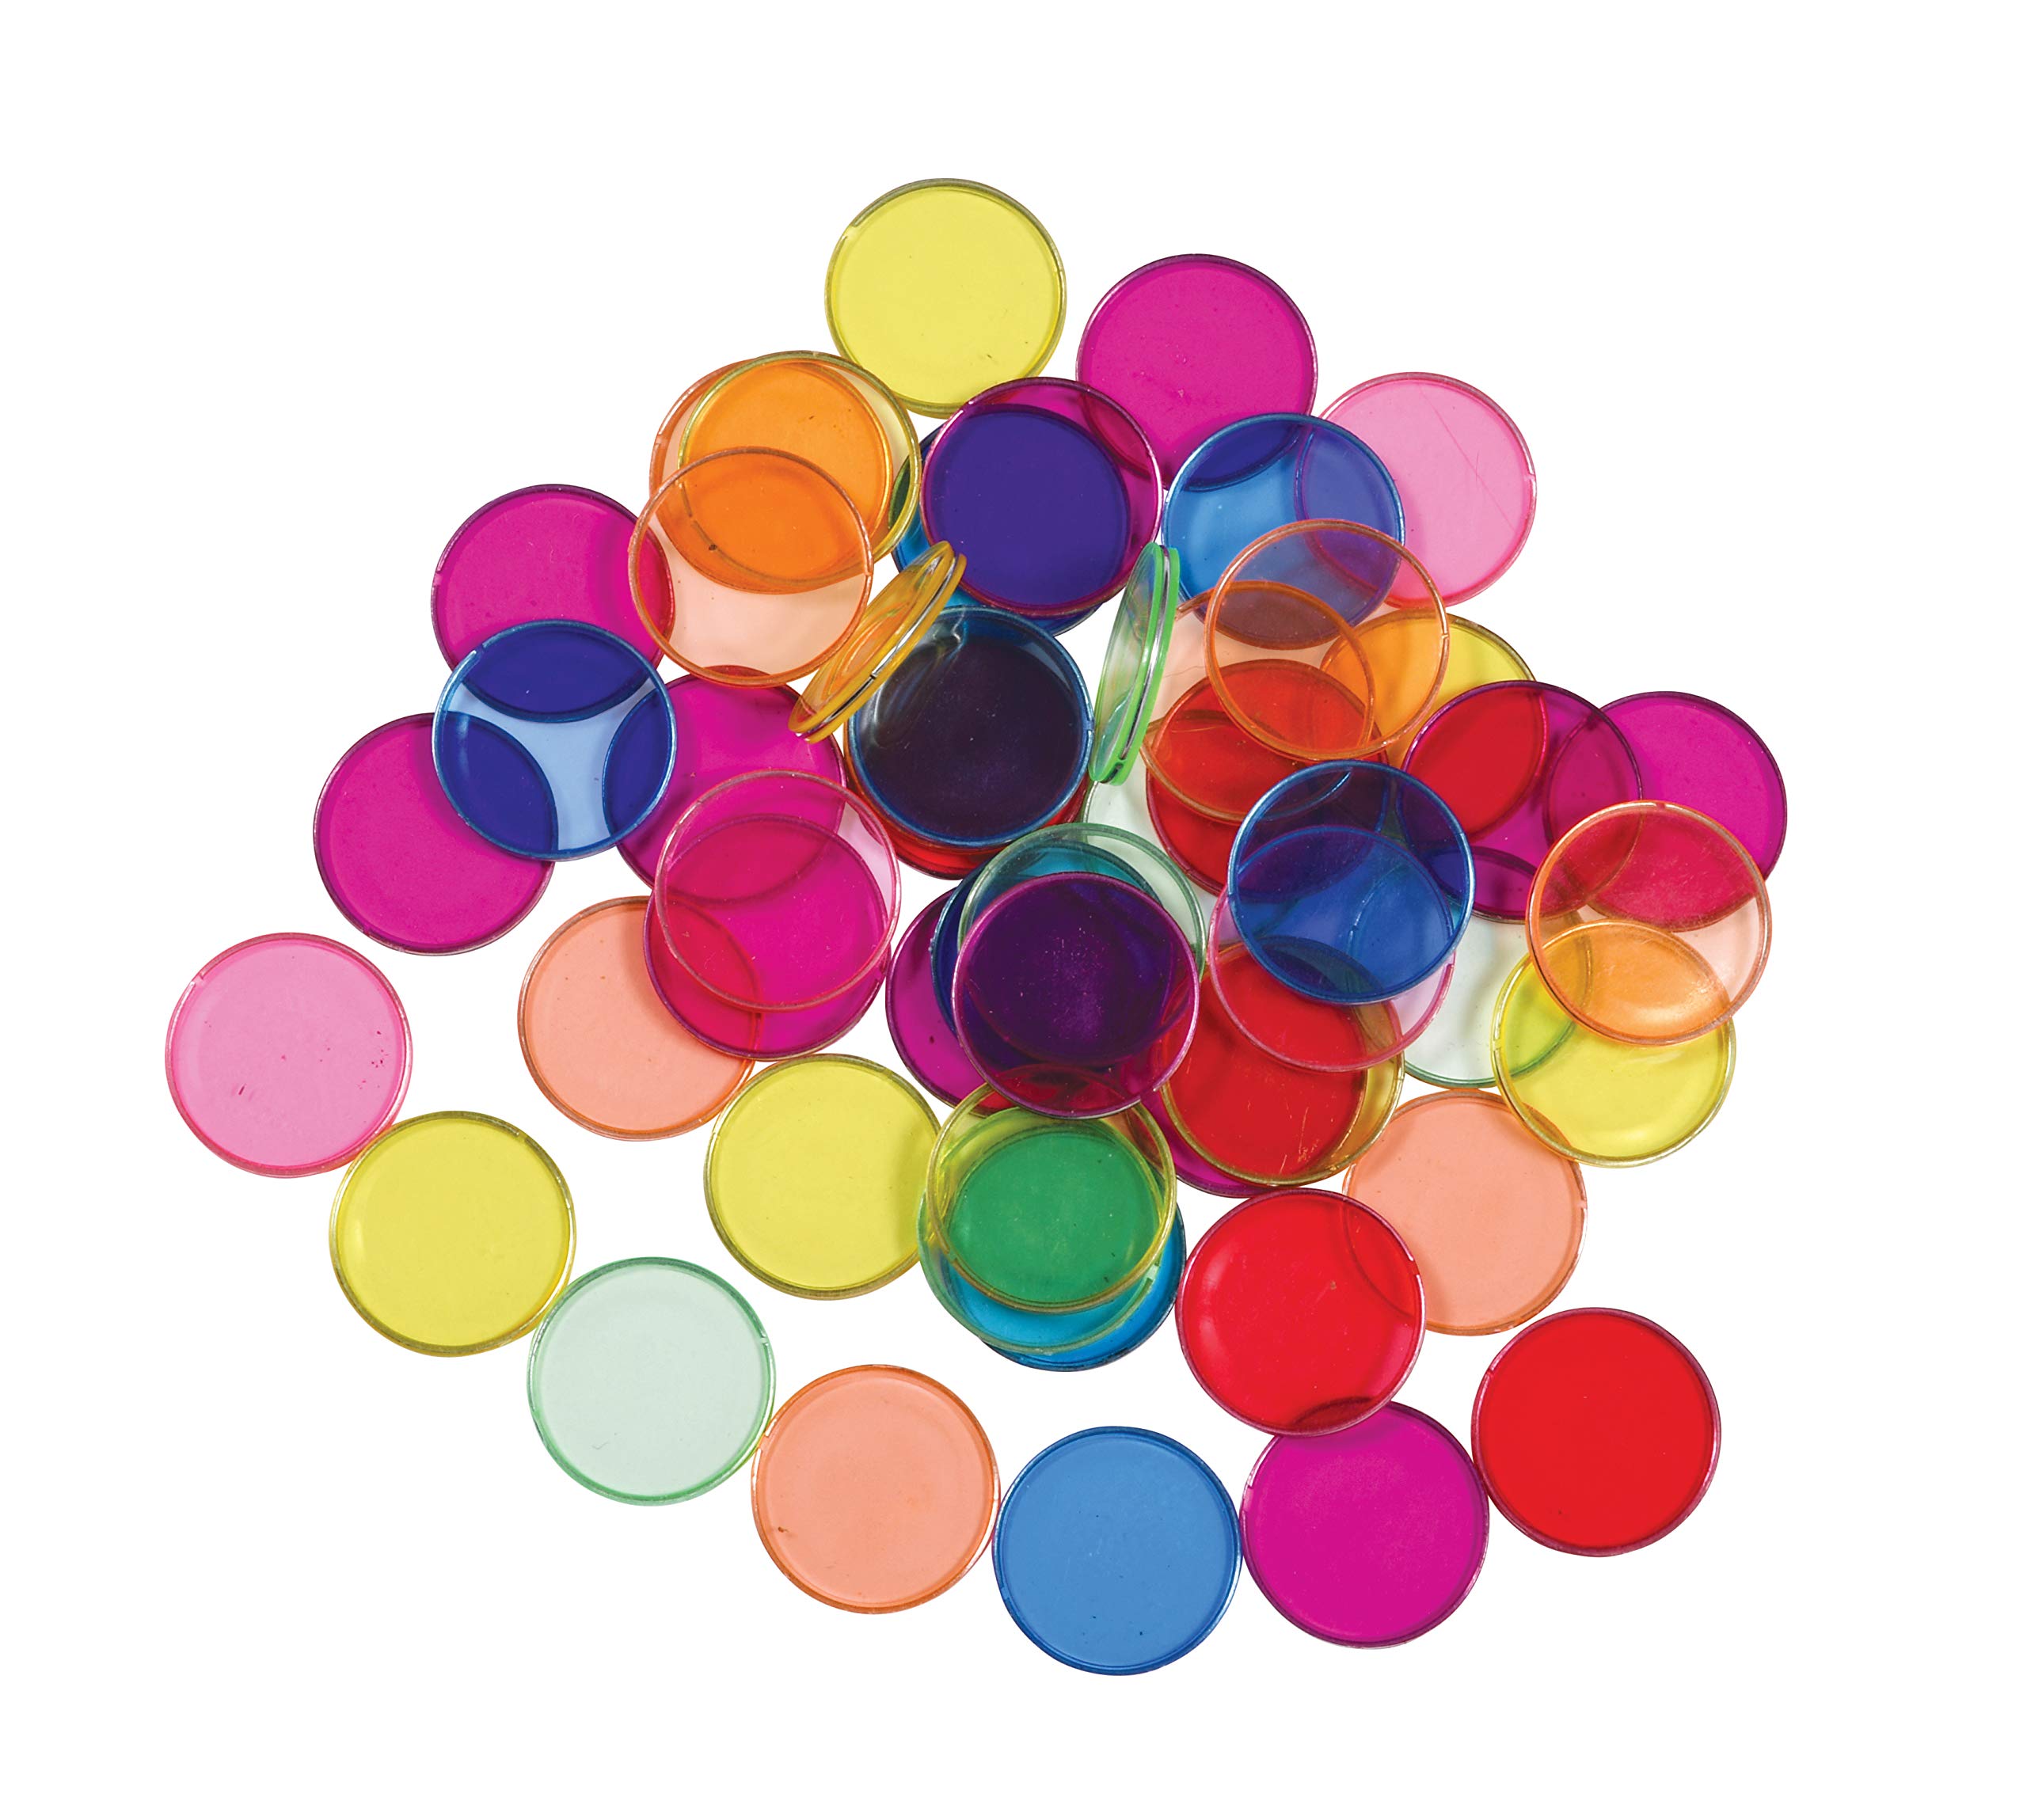 LEARNING ADVANTAGE-7253 Transparent Plastic Counters - Steel-Ringed - Set of 50 - Assorted Colors - Great for Kindergarten, Sensory Play and Light Panels